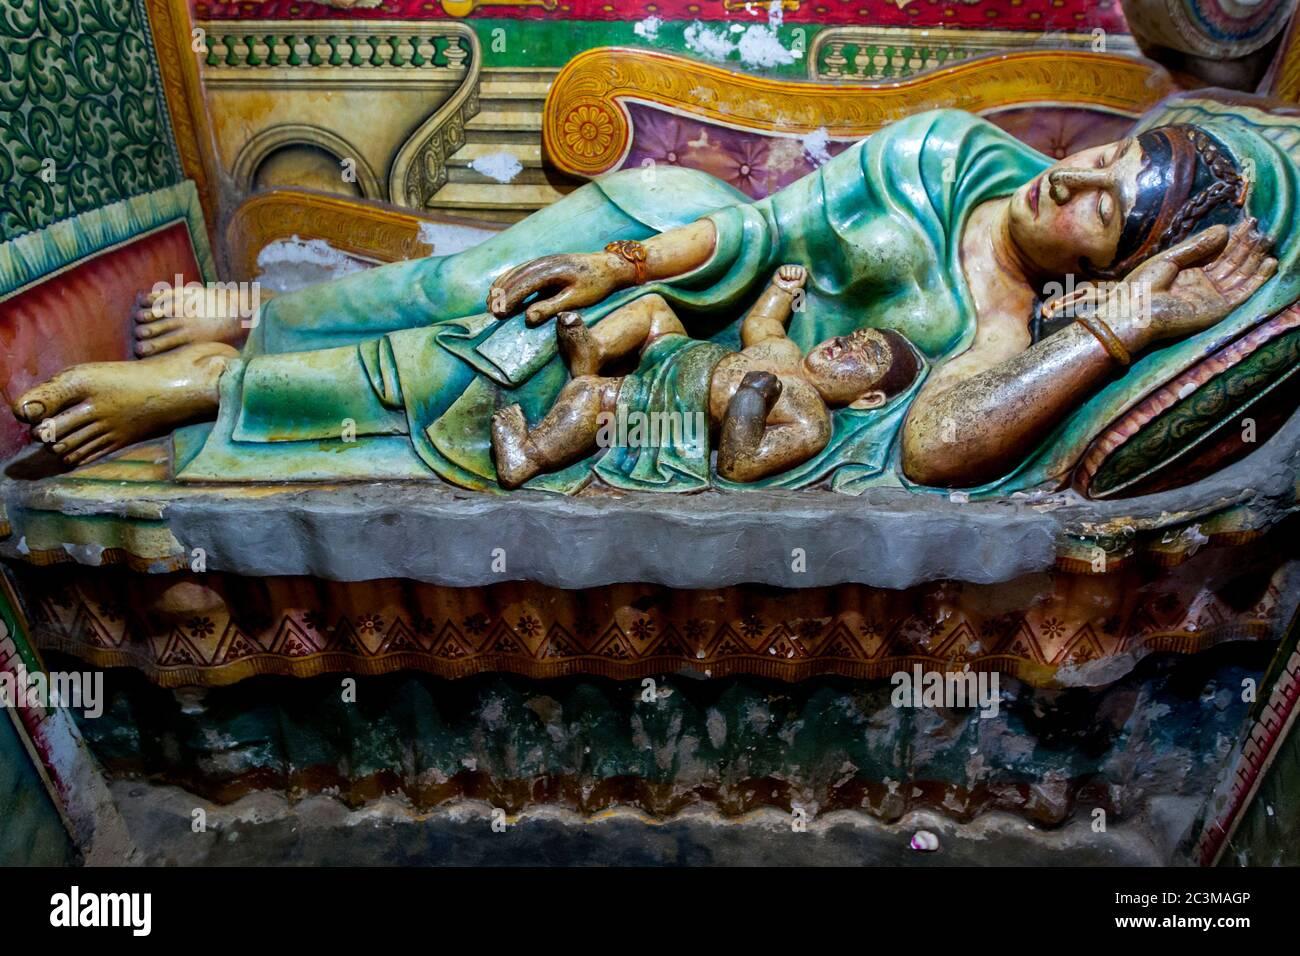 A statue showing the baby Lord Buddha laying with his mother in the Image House at Wewurukannala Vihara in Dickwella on the south coast of Sri Lanka. Stock Photo